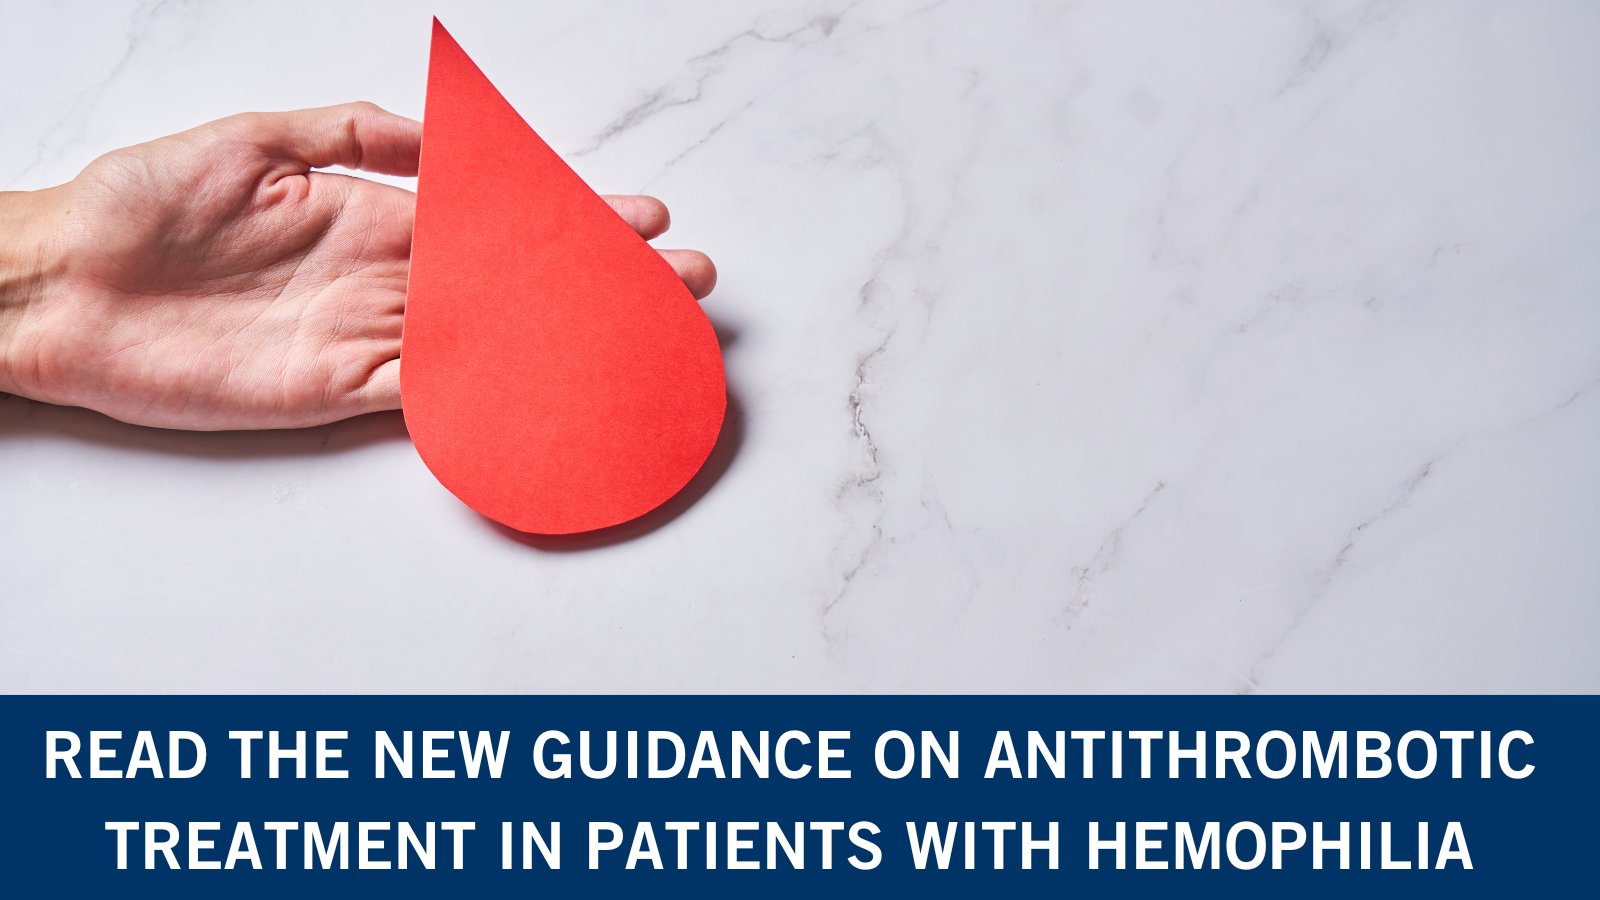 The ISTH, EHA, EAHAD and ESO publishes clinical practice guideline: Antithrombotic treatment in patients with hemophilia